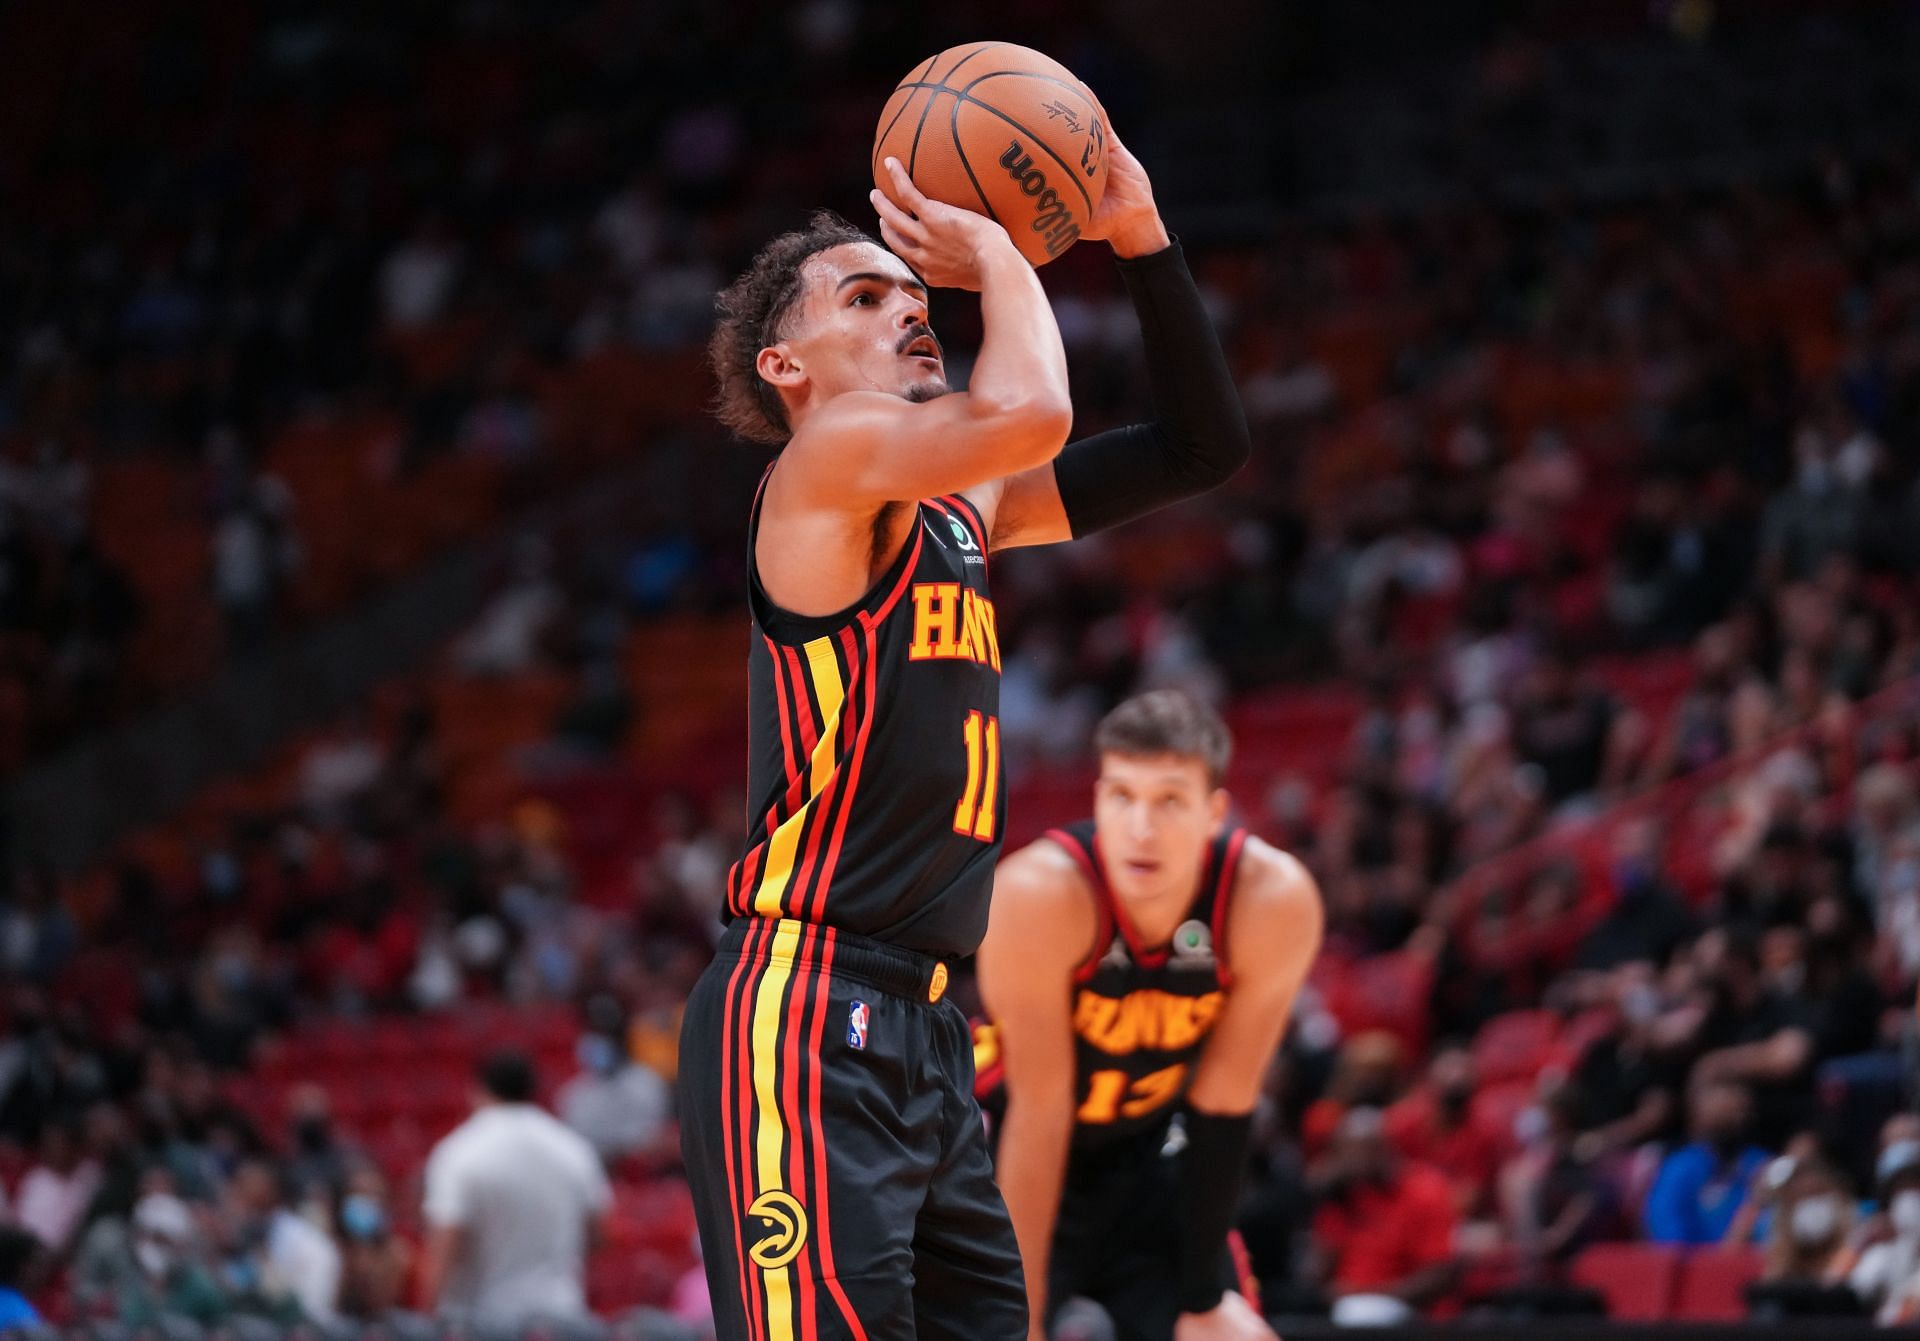 Trae Young #11 of the Atlanta Hawks shoots a free throw in the second quarter against the Miami Heat in preseason action at FTX Arena on October 04, 2021 in Miami, Florida.